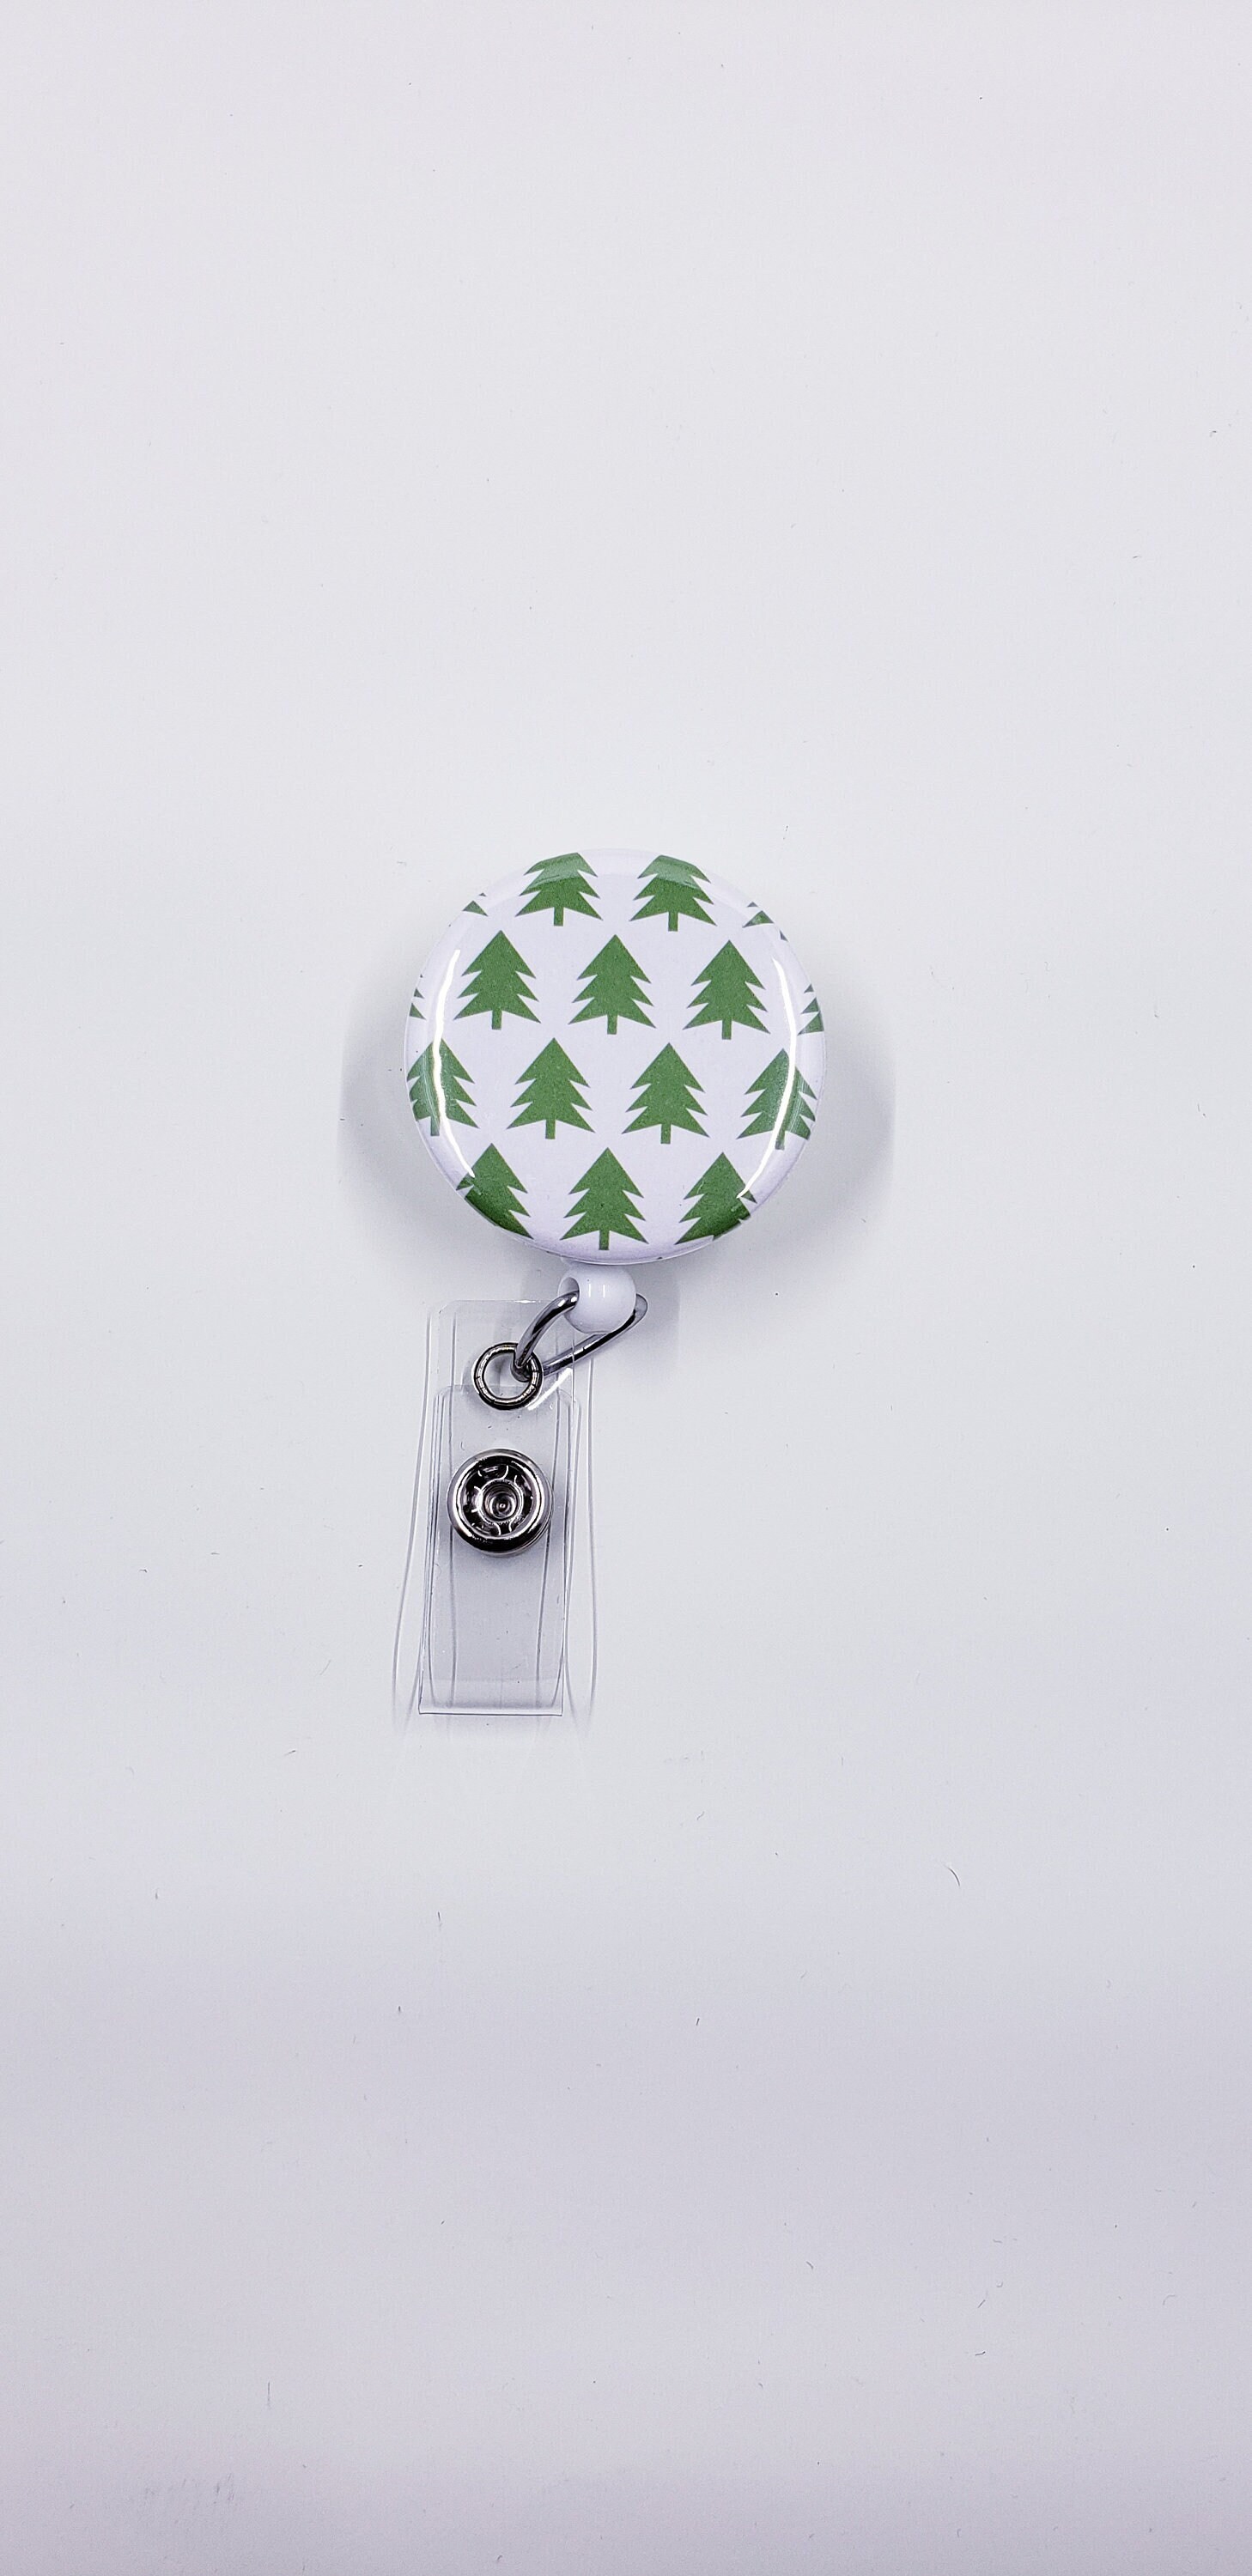 Personalized Monogram Badge Reel, 2 Interchangeable Toppers, 1.5 Buttons, Gift for Teacher